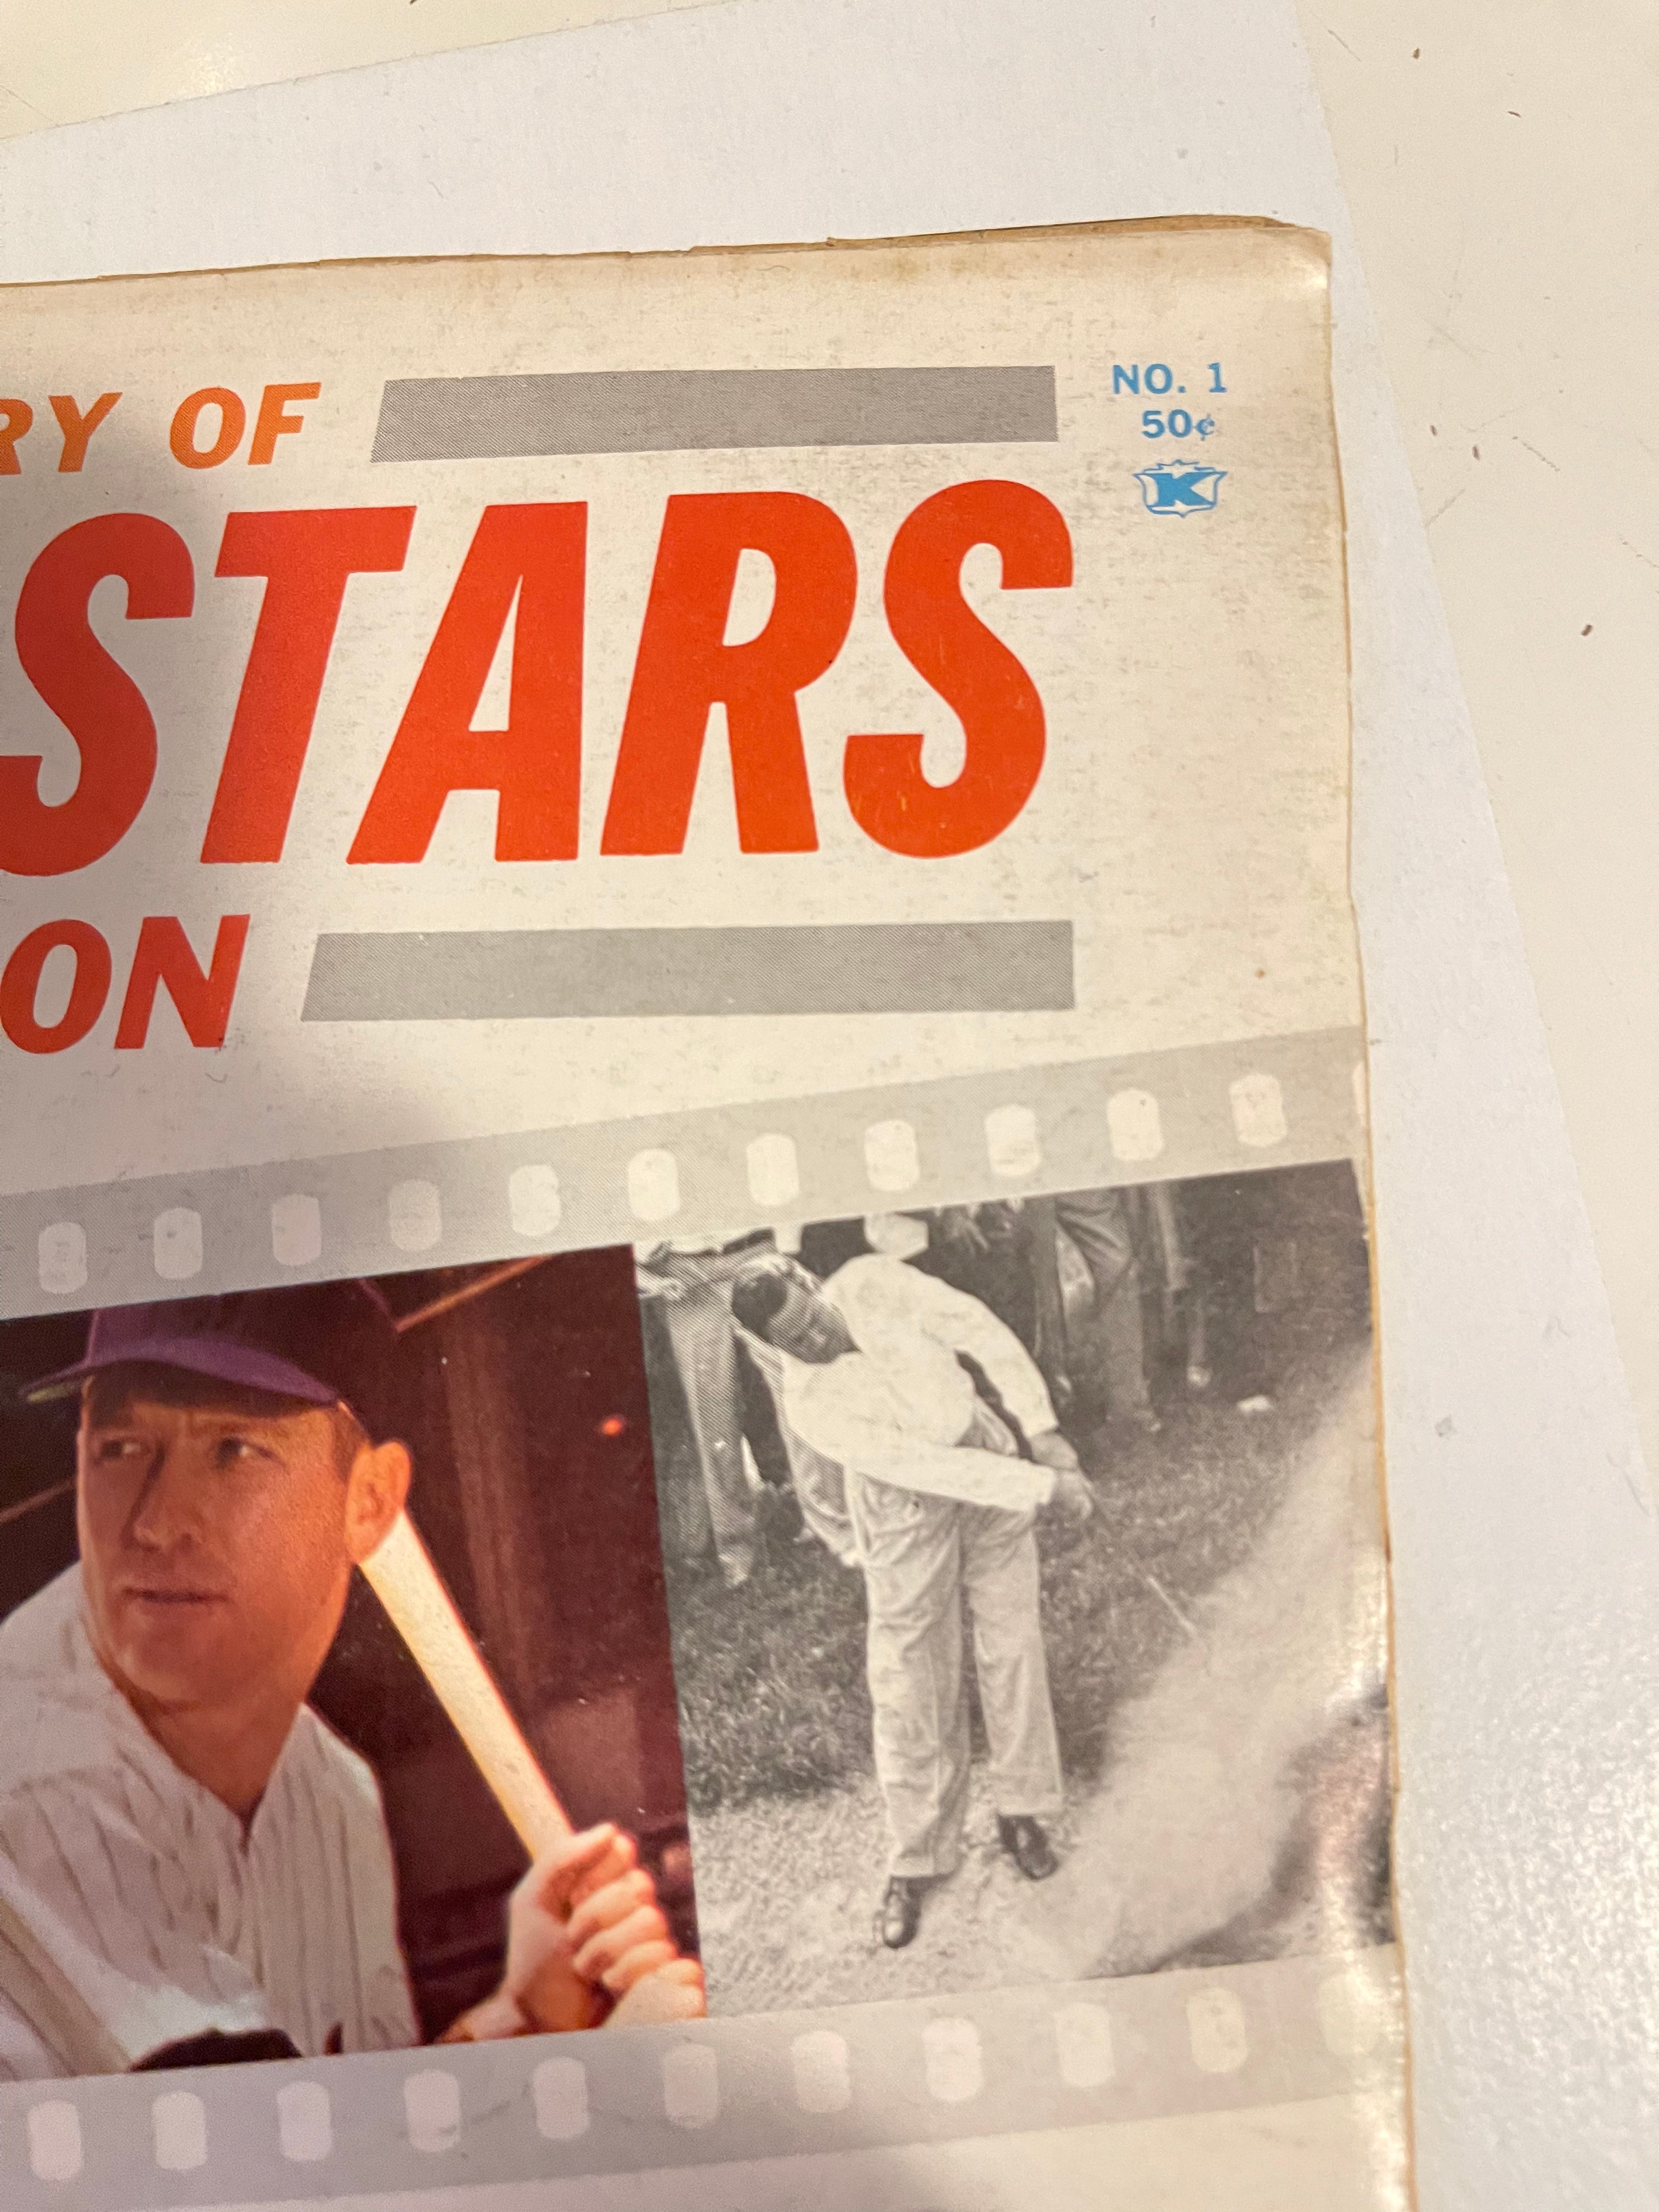 Sports Stars in action photos magazine #1 from 1961